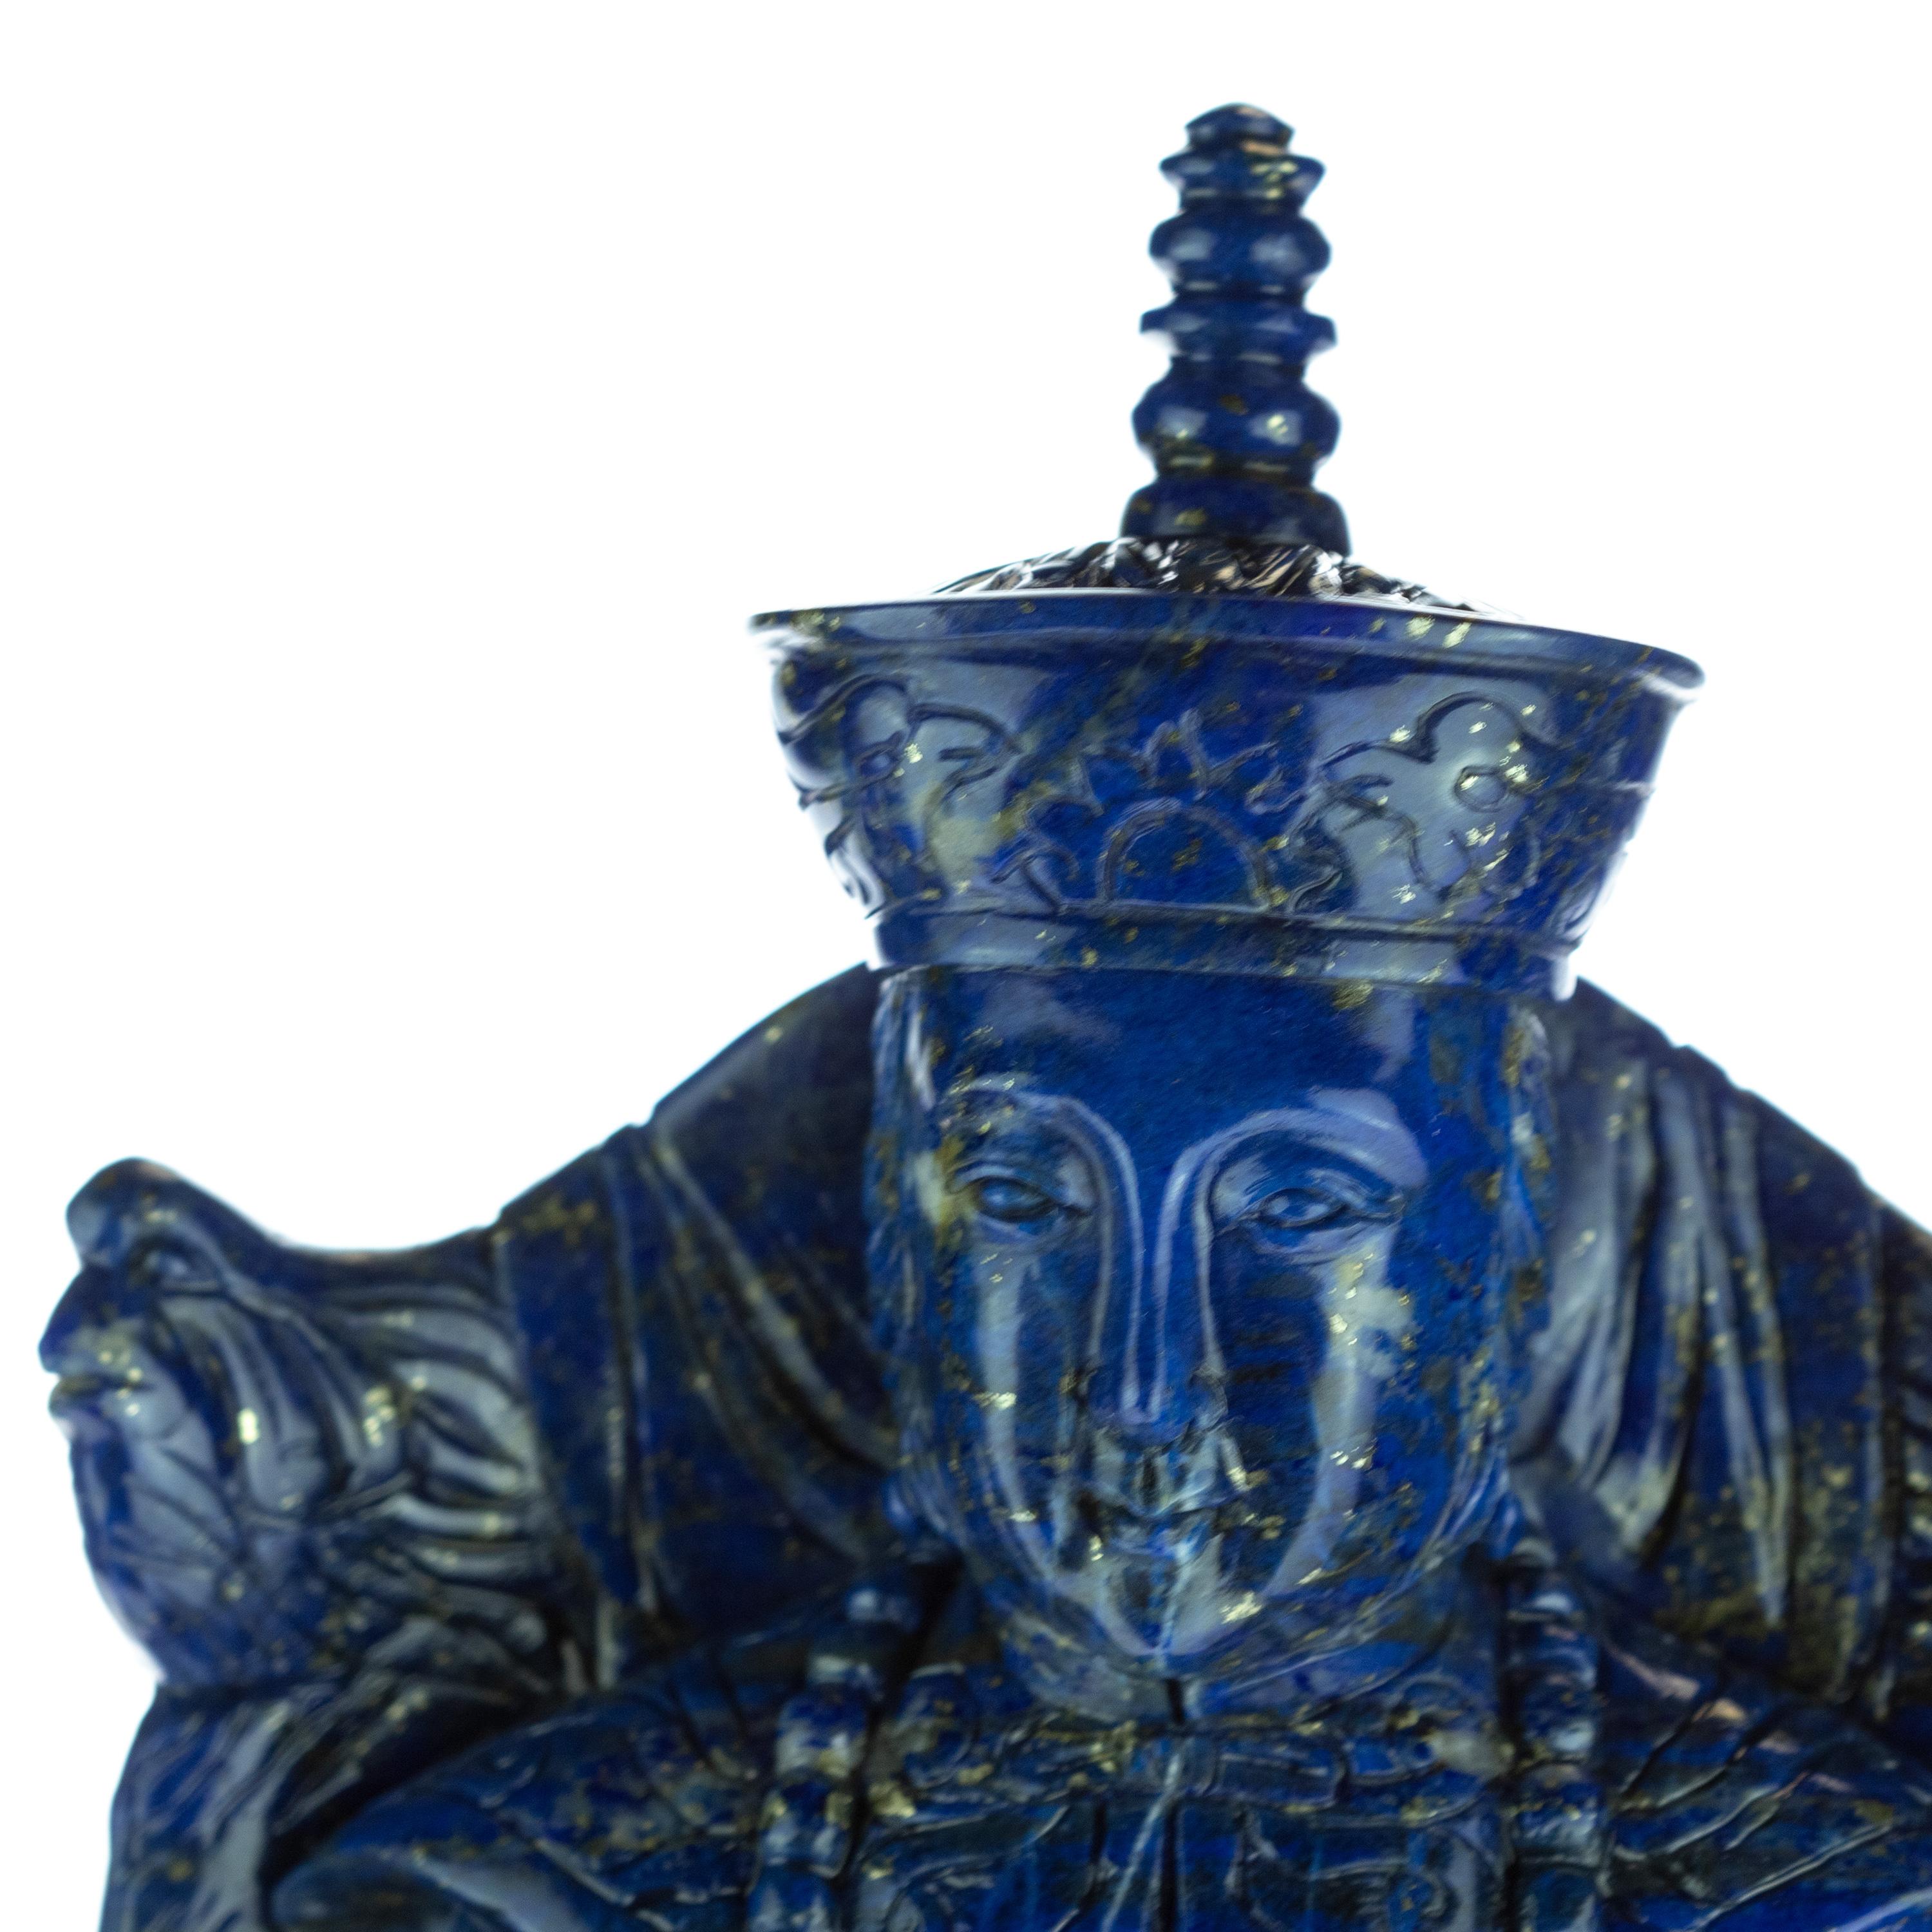 Lapis Lazuli King Queen Carved Blue Gemstone Artisanal Royalty Statue Sculpture For Sale 4